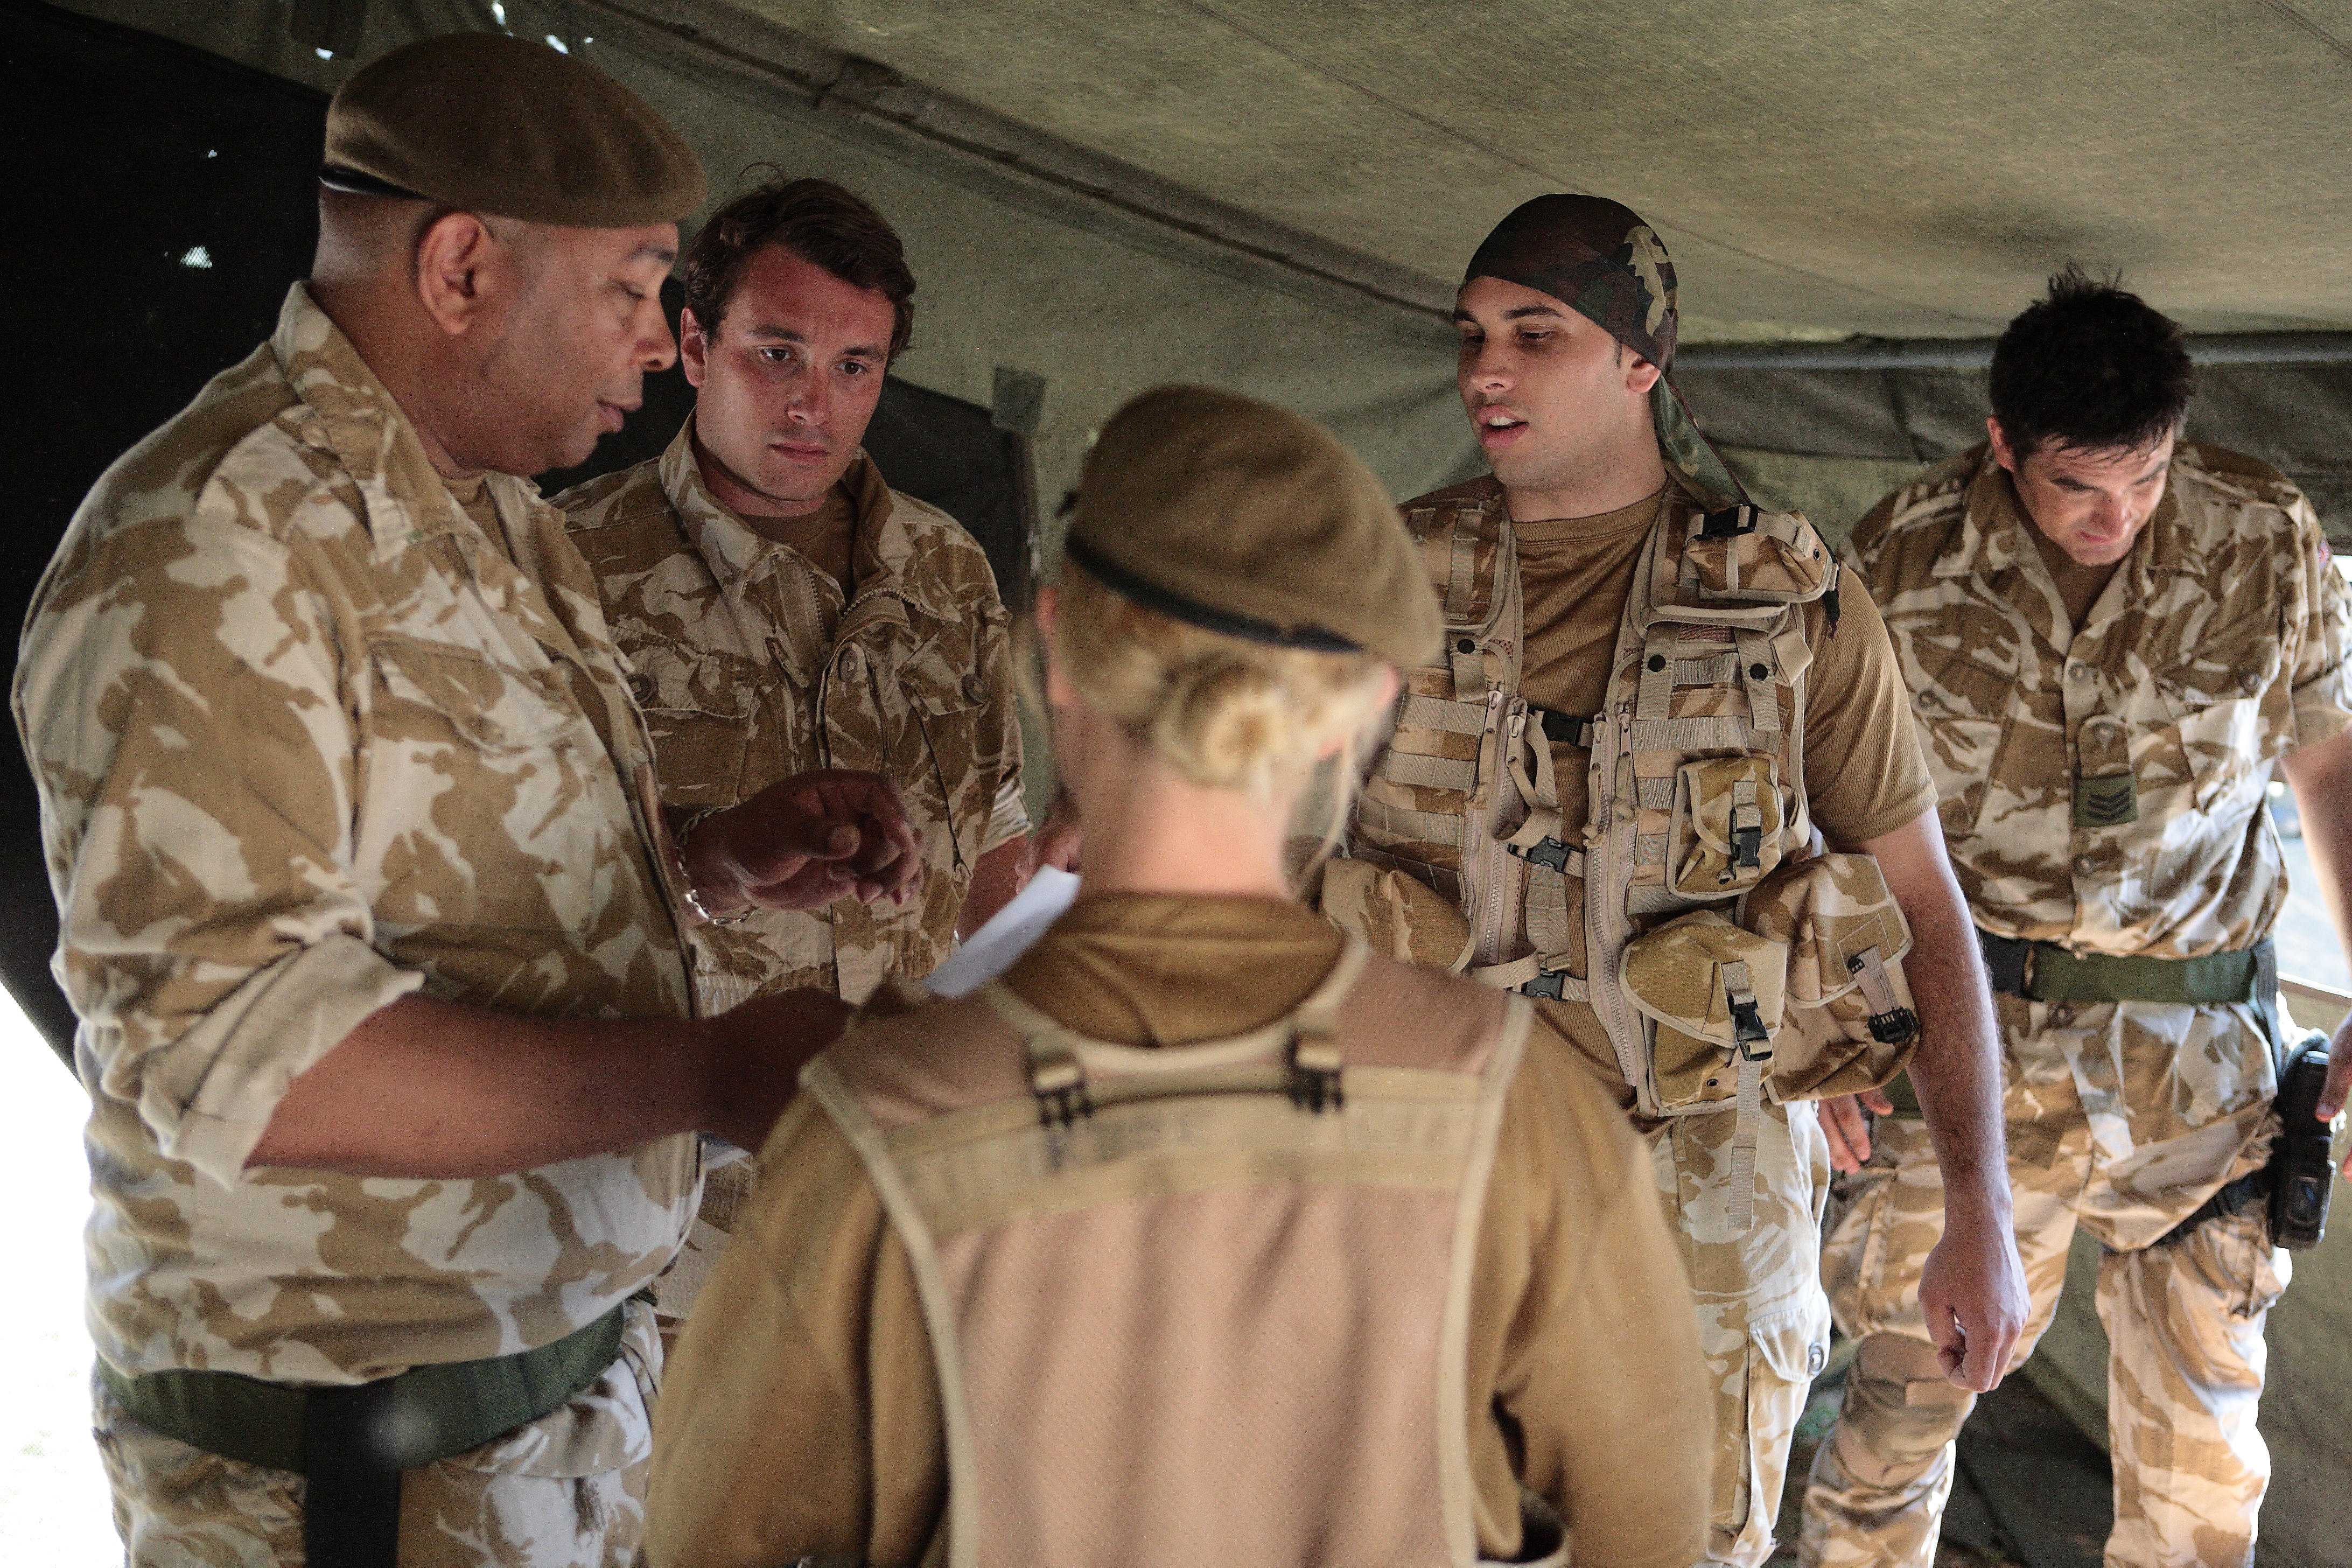 'A Landscape Of Lies' Lieutenant Hayes (Robby Haynes) briefs his troops on the mission ahead.